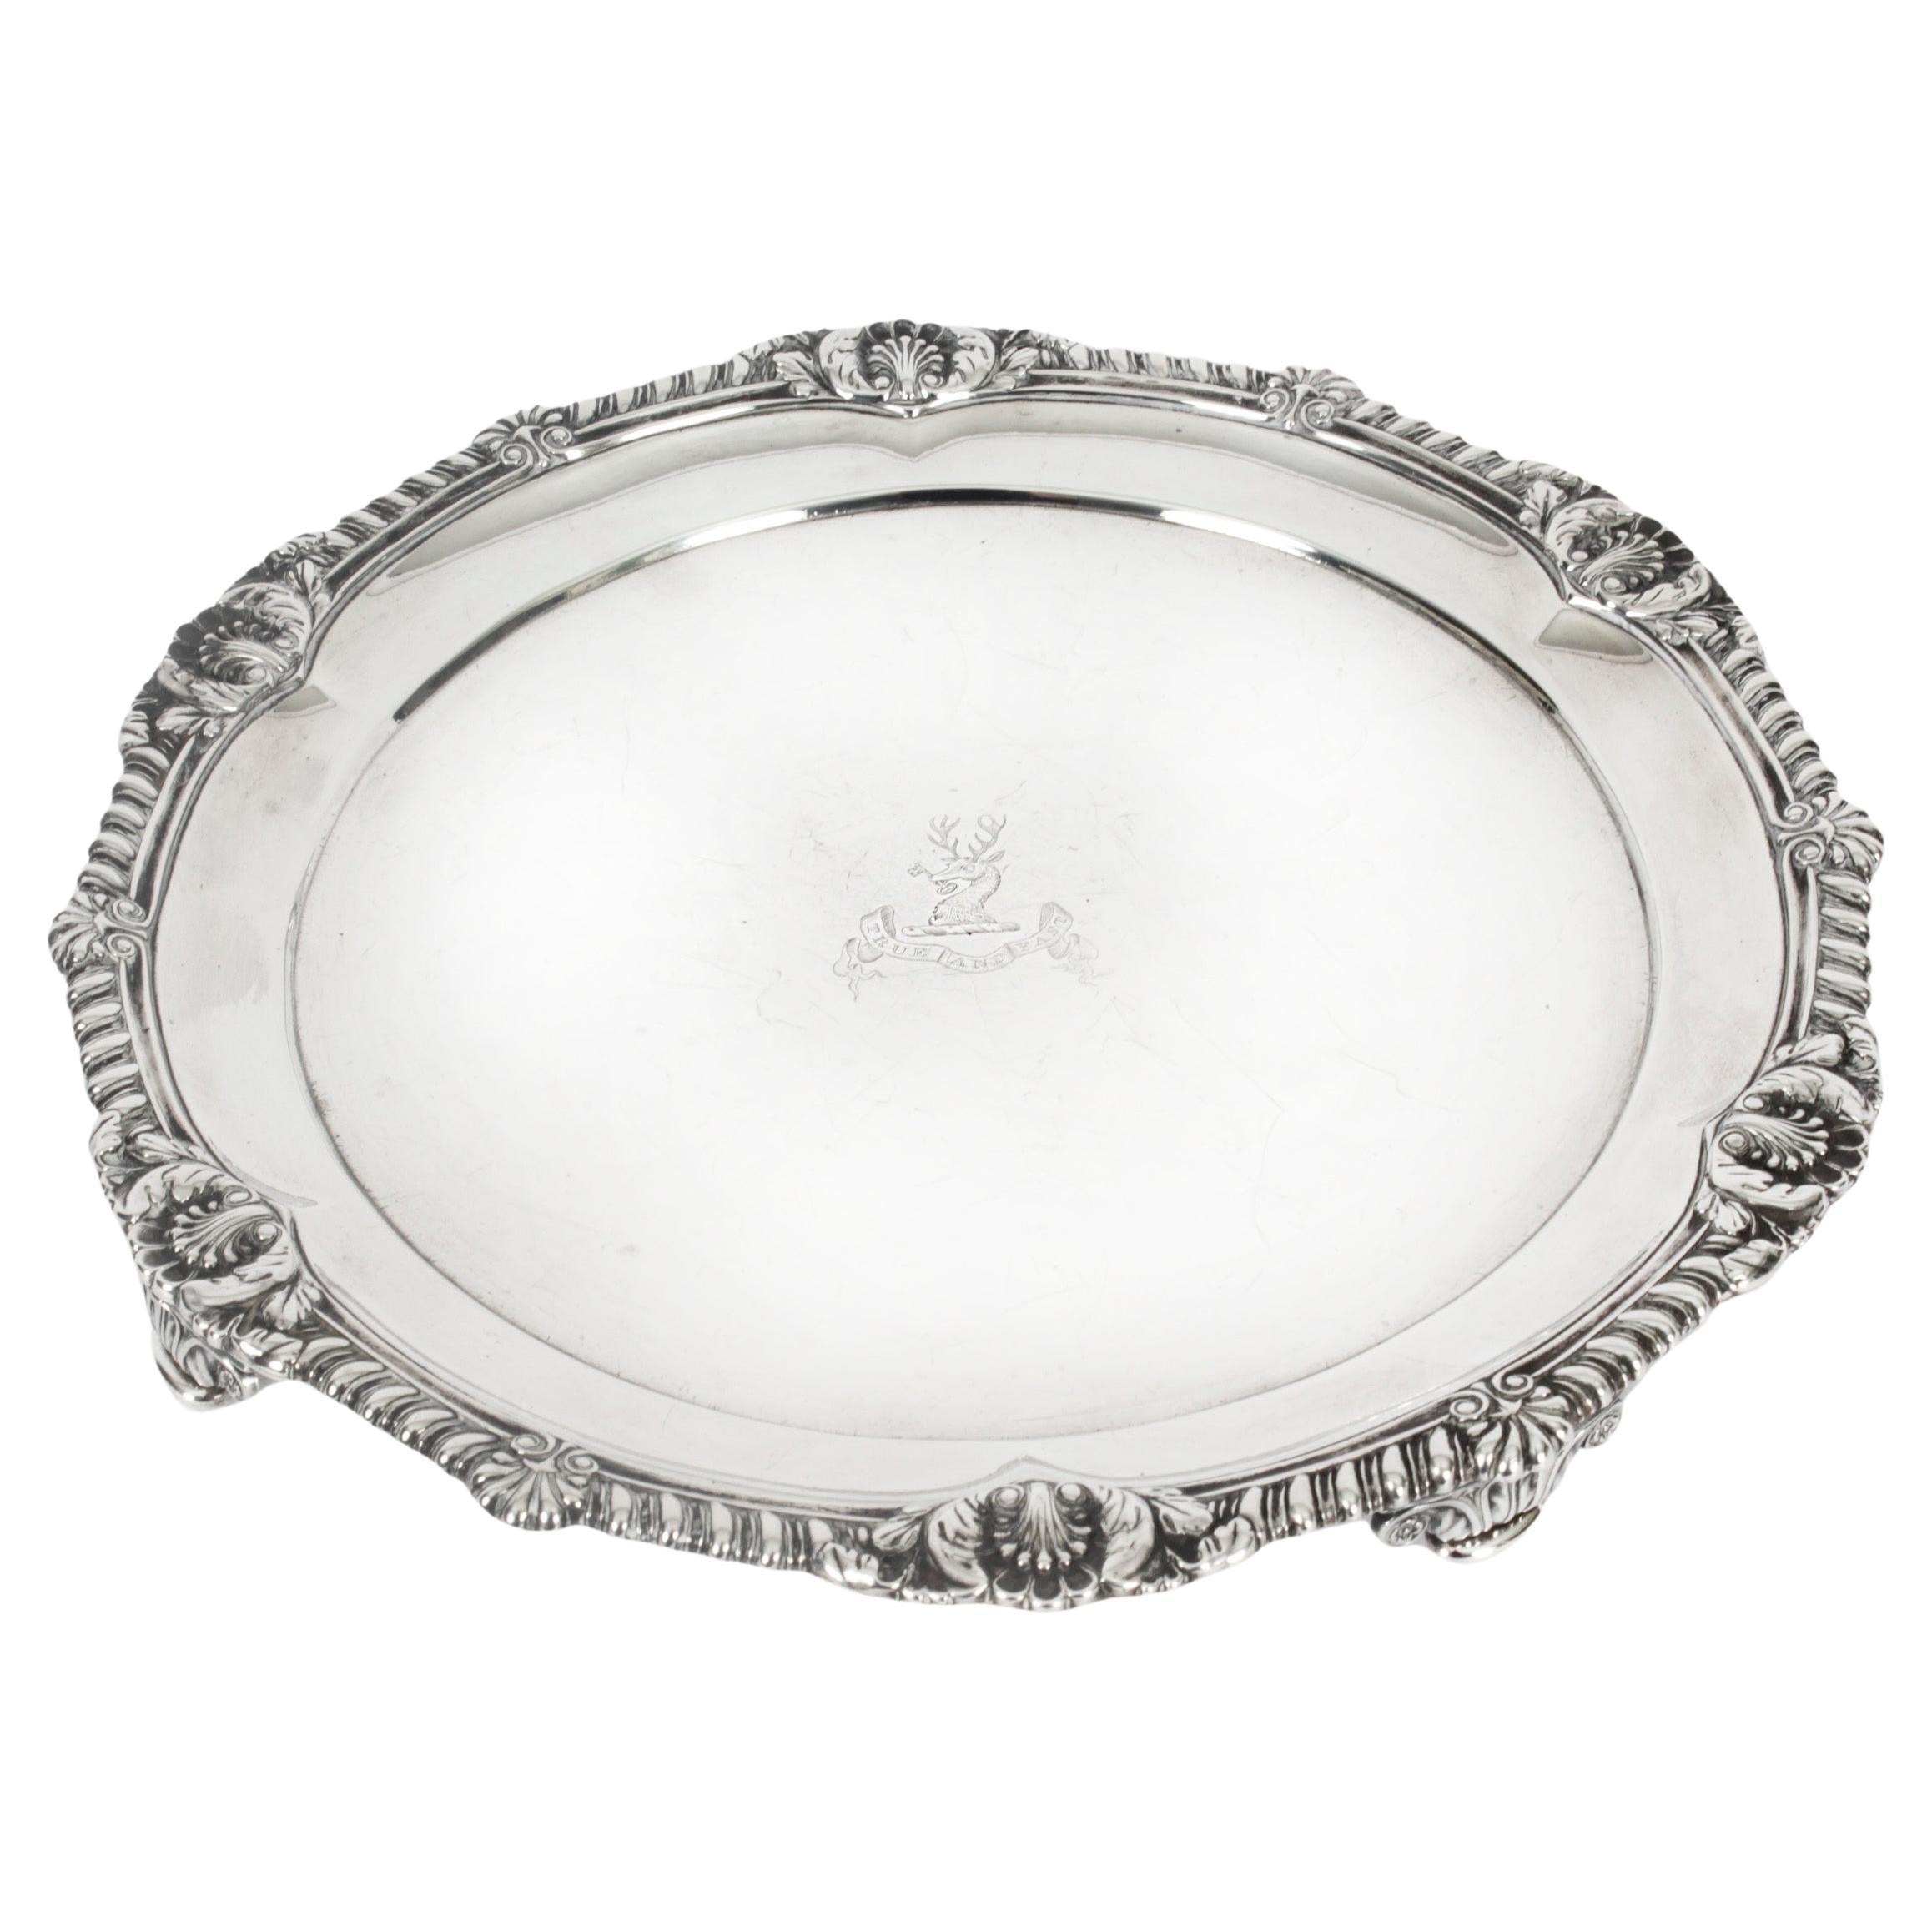 Antique George III Sterling Silver Salver by Paul Storr 1811 19th Century For Sale